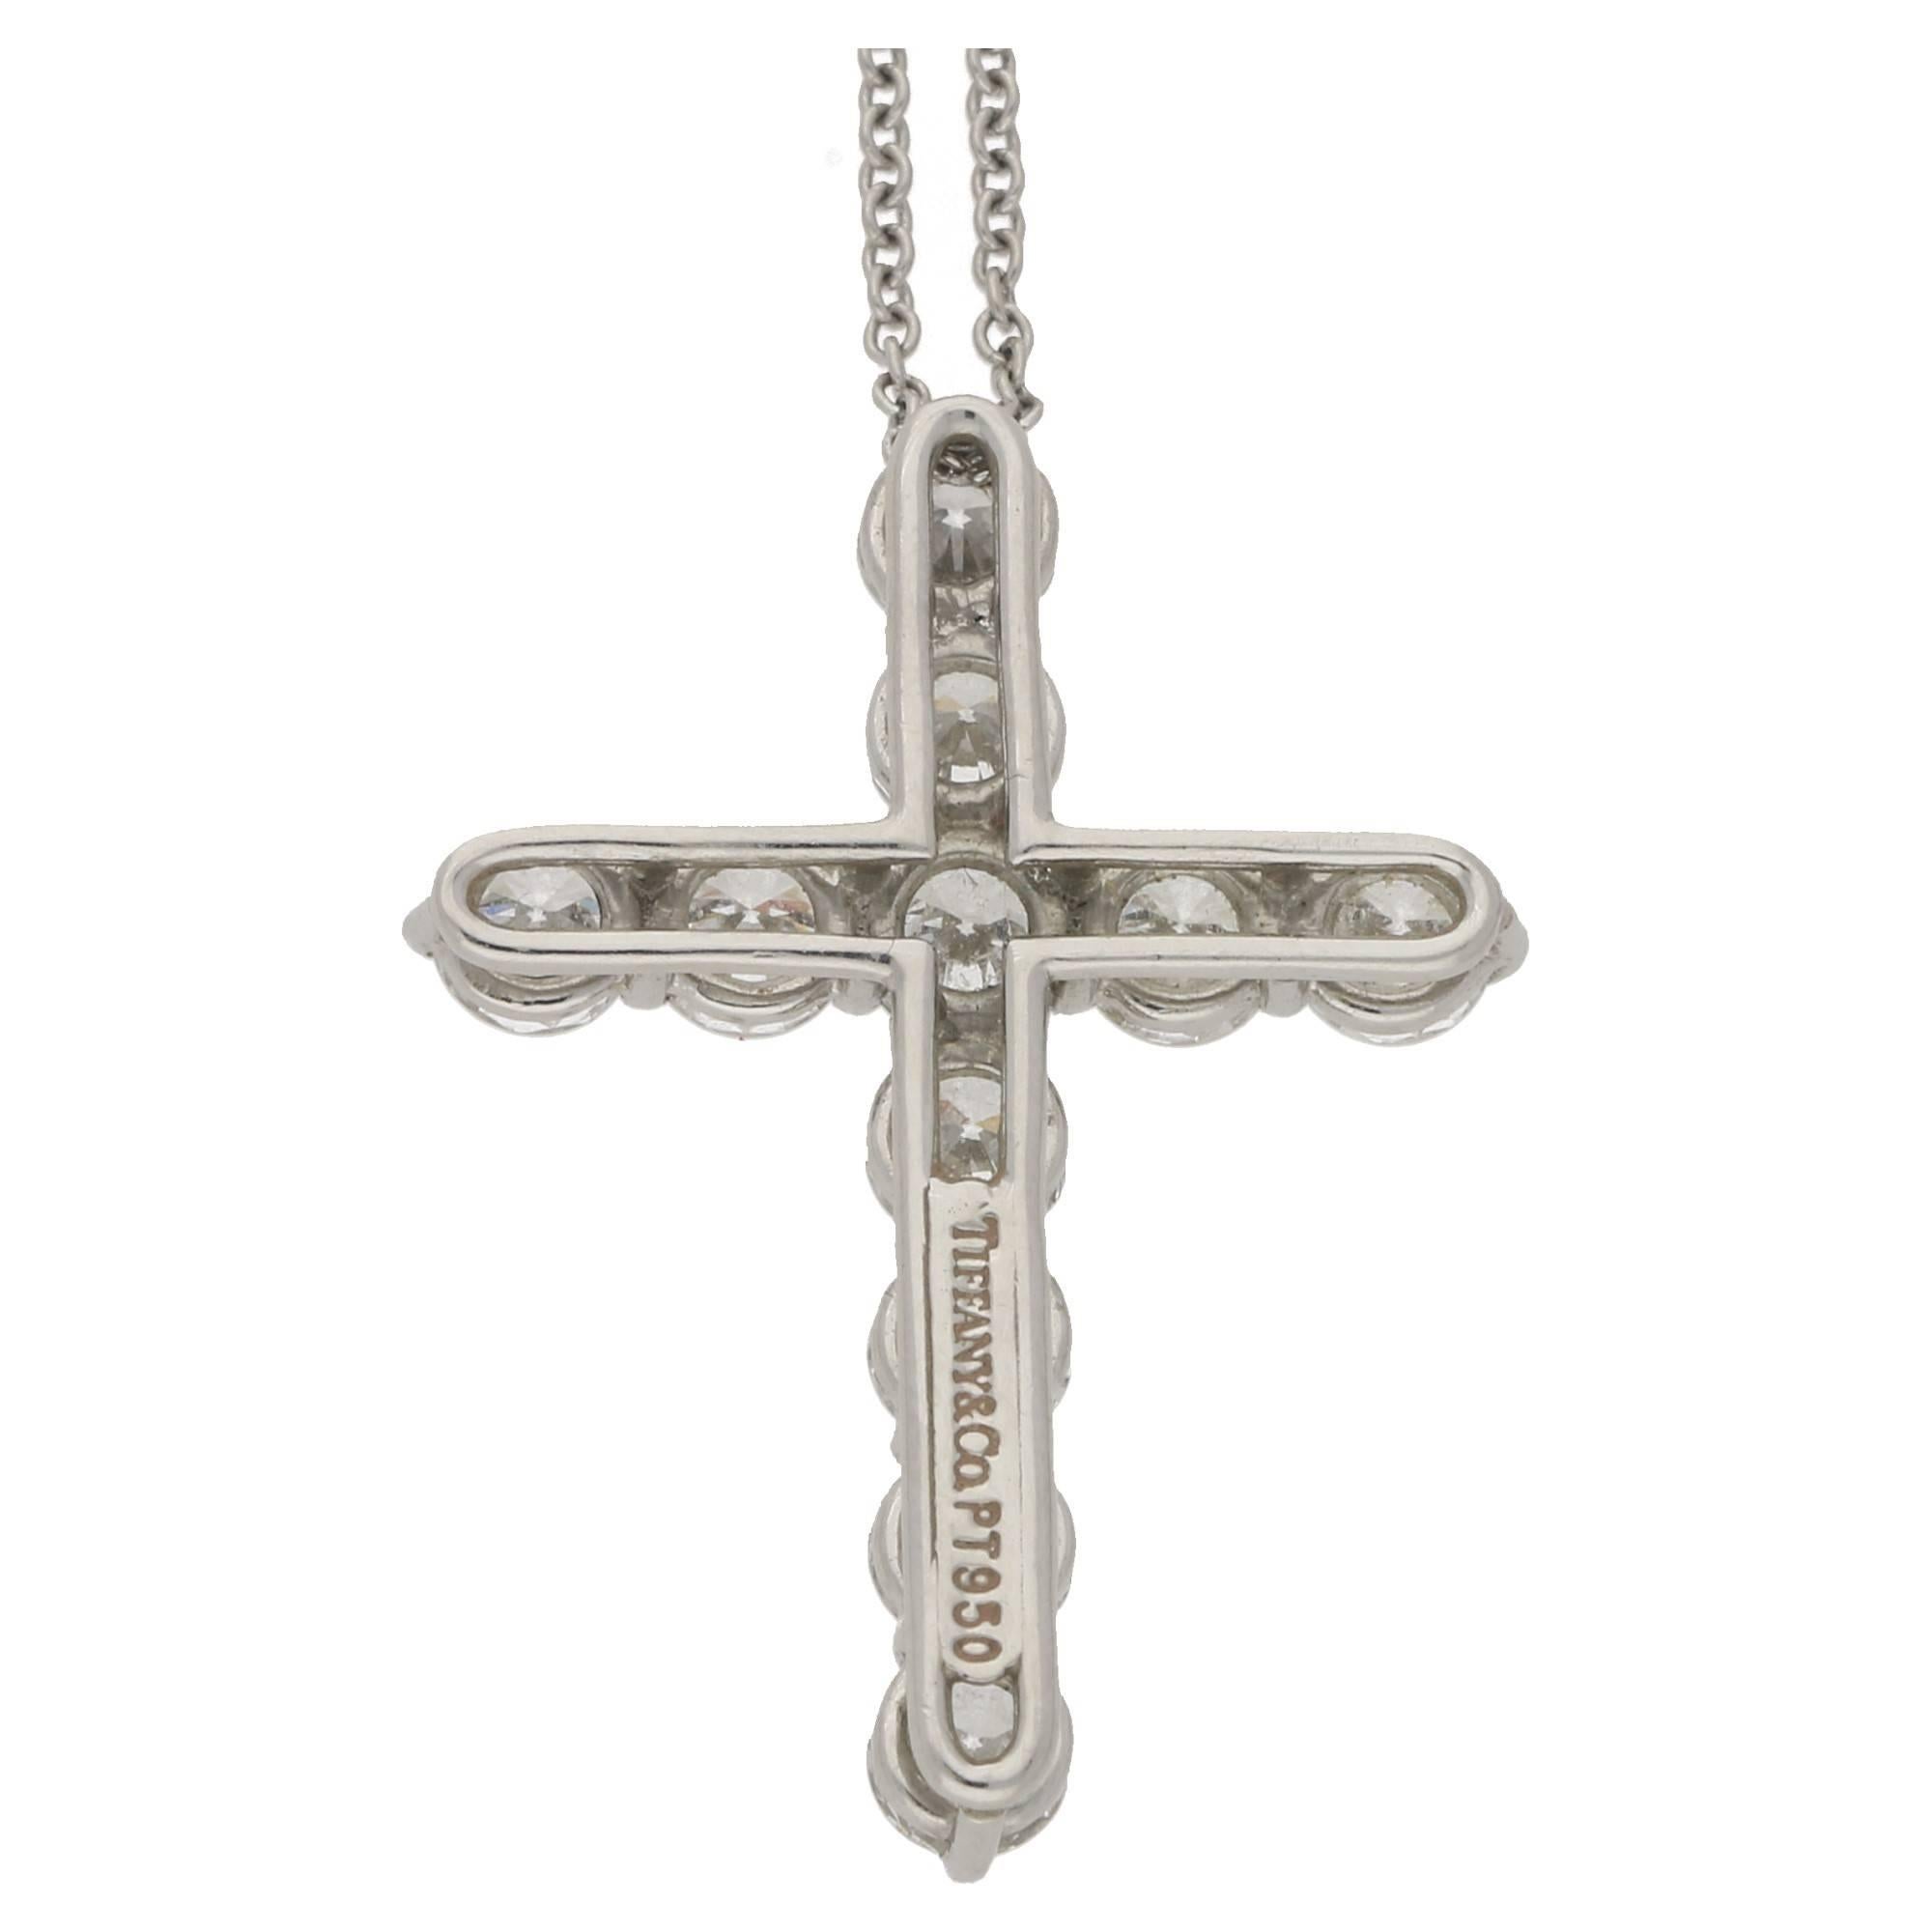 A diamond set cross signed Tiffany & Co. The cross set in platinum is formed of eleven round brilliant cut diamonds claw set to a cross setting. The cross is attached to a platinum chain also signed Tiffany & Co. Estimated total diamond weight: 1.80